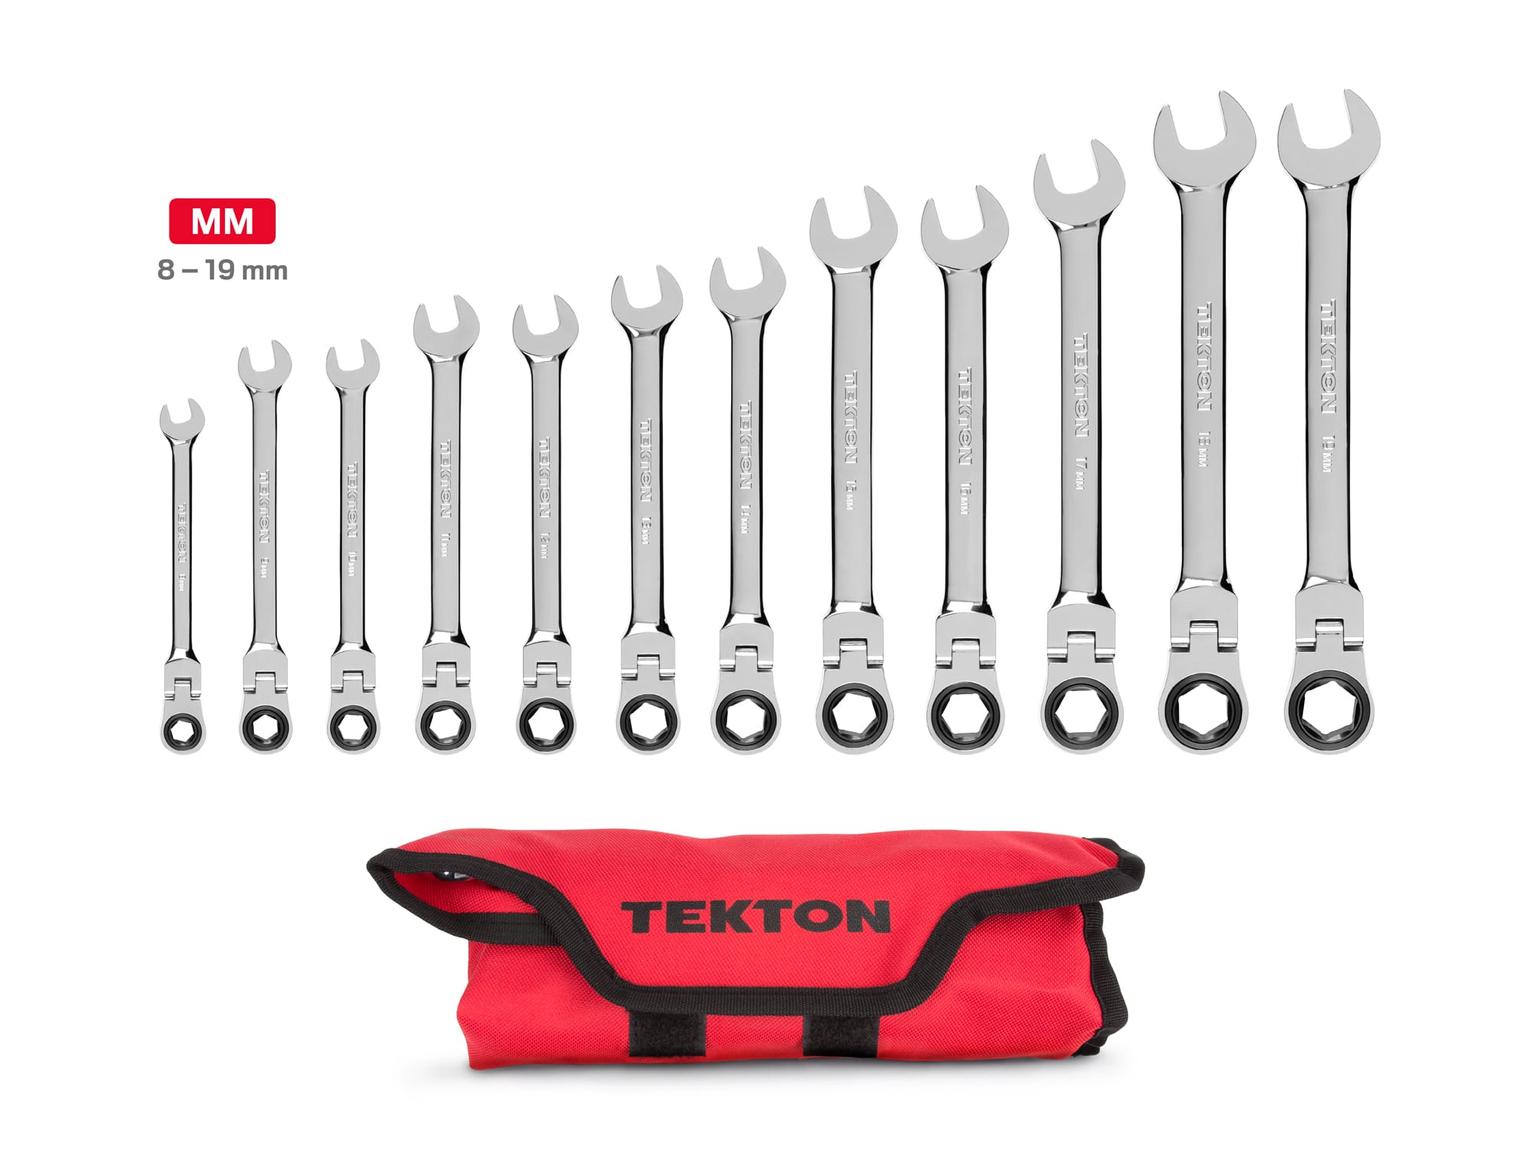 TEKTON WRN57190-T Flex Ratcheting Combination Wrench Set with Pouch, 12-Piece (8-19 mm)